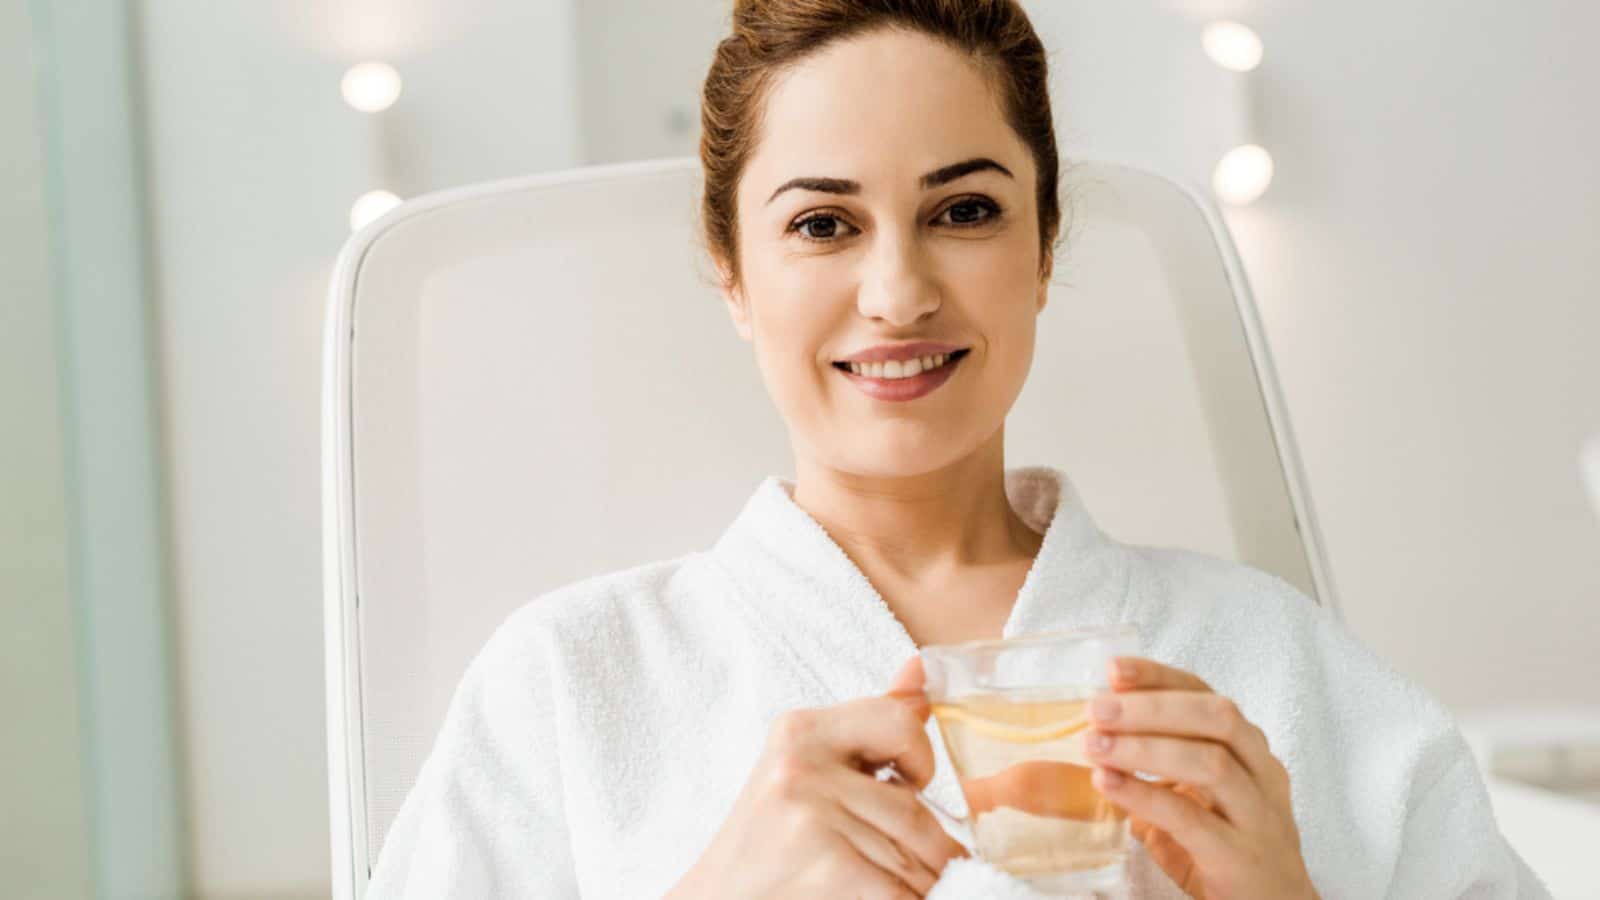 Woman in bathrobe holding cup with herbal drink and smiling at camera